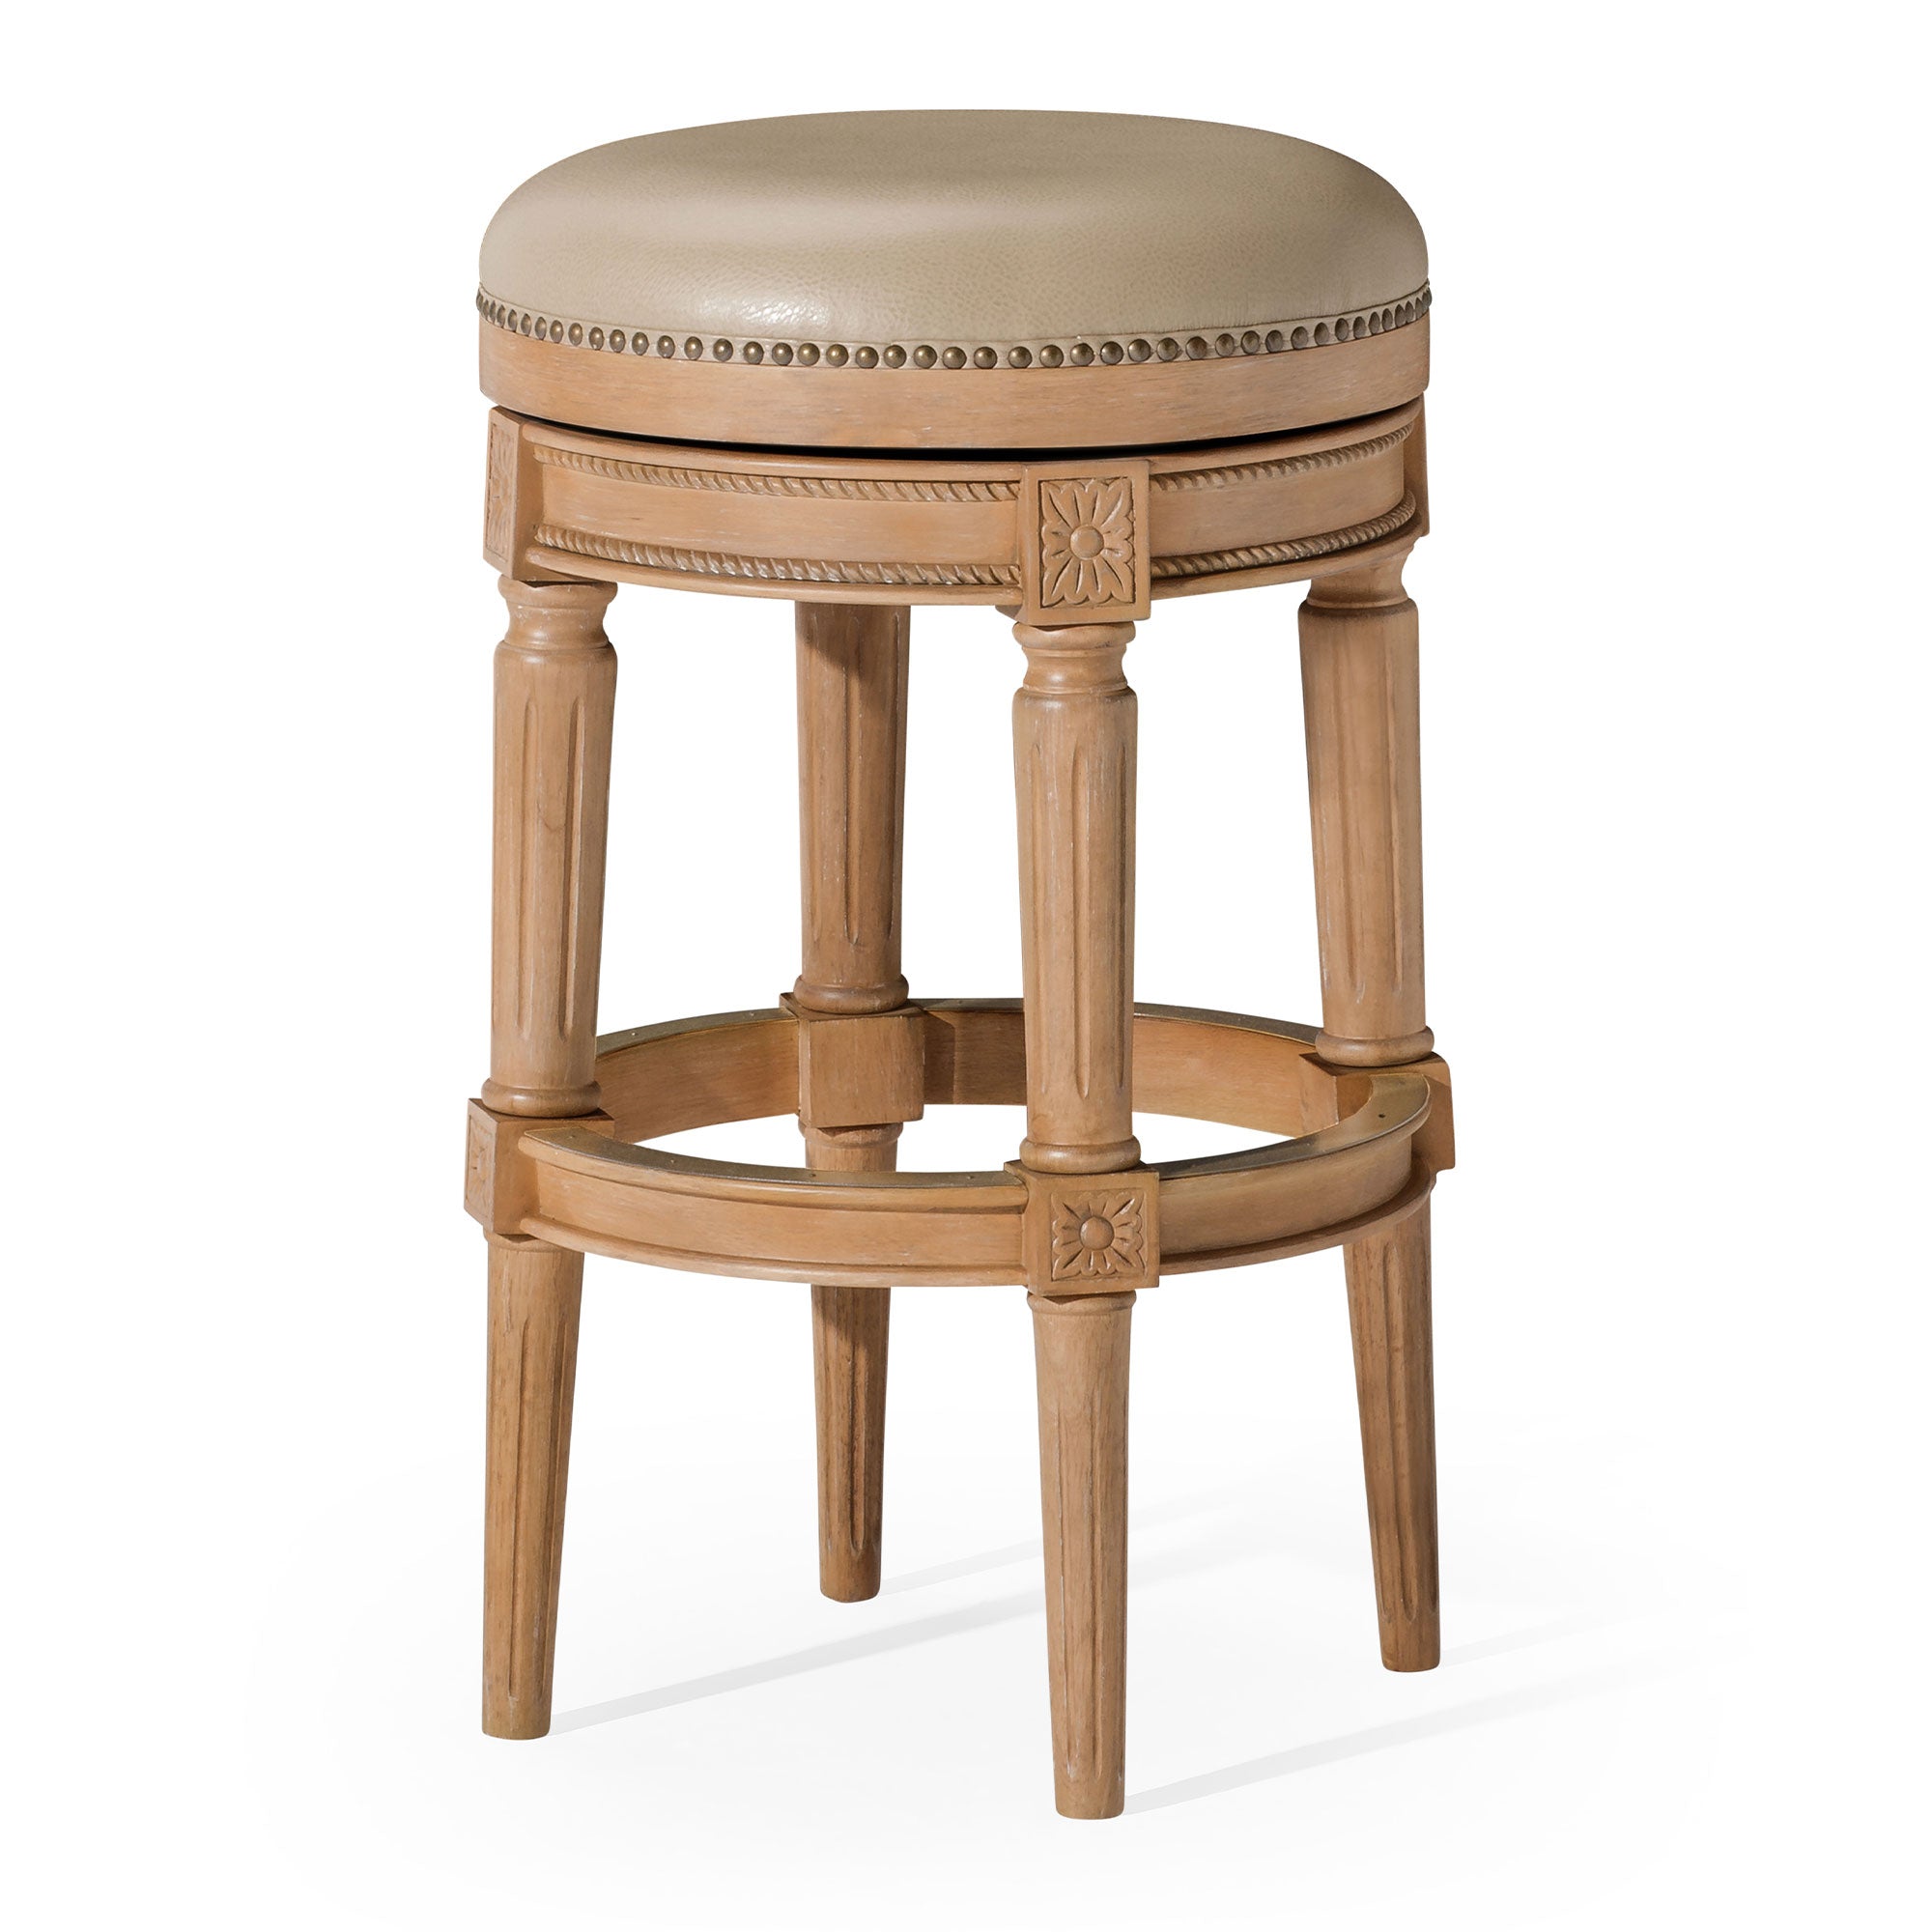 Pullman Backless Bar Stool in Weathered Oak Finish with Avanti Bone Vegan Leather in Stools by Maven Lane